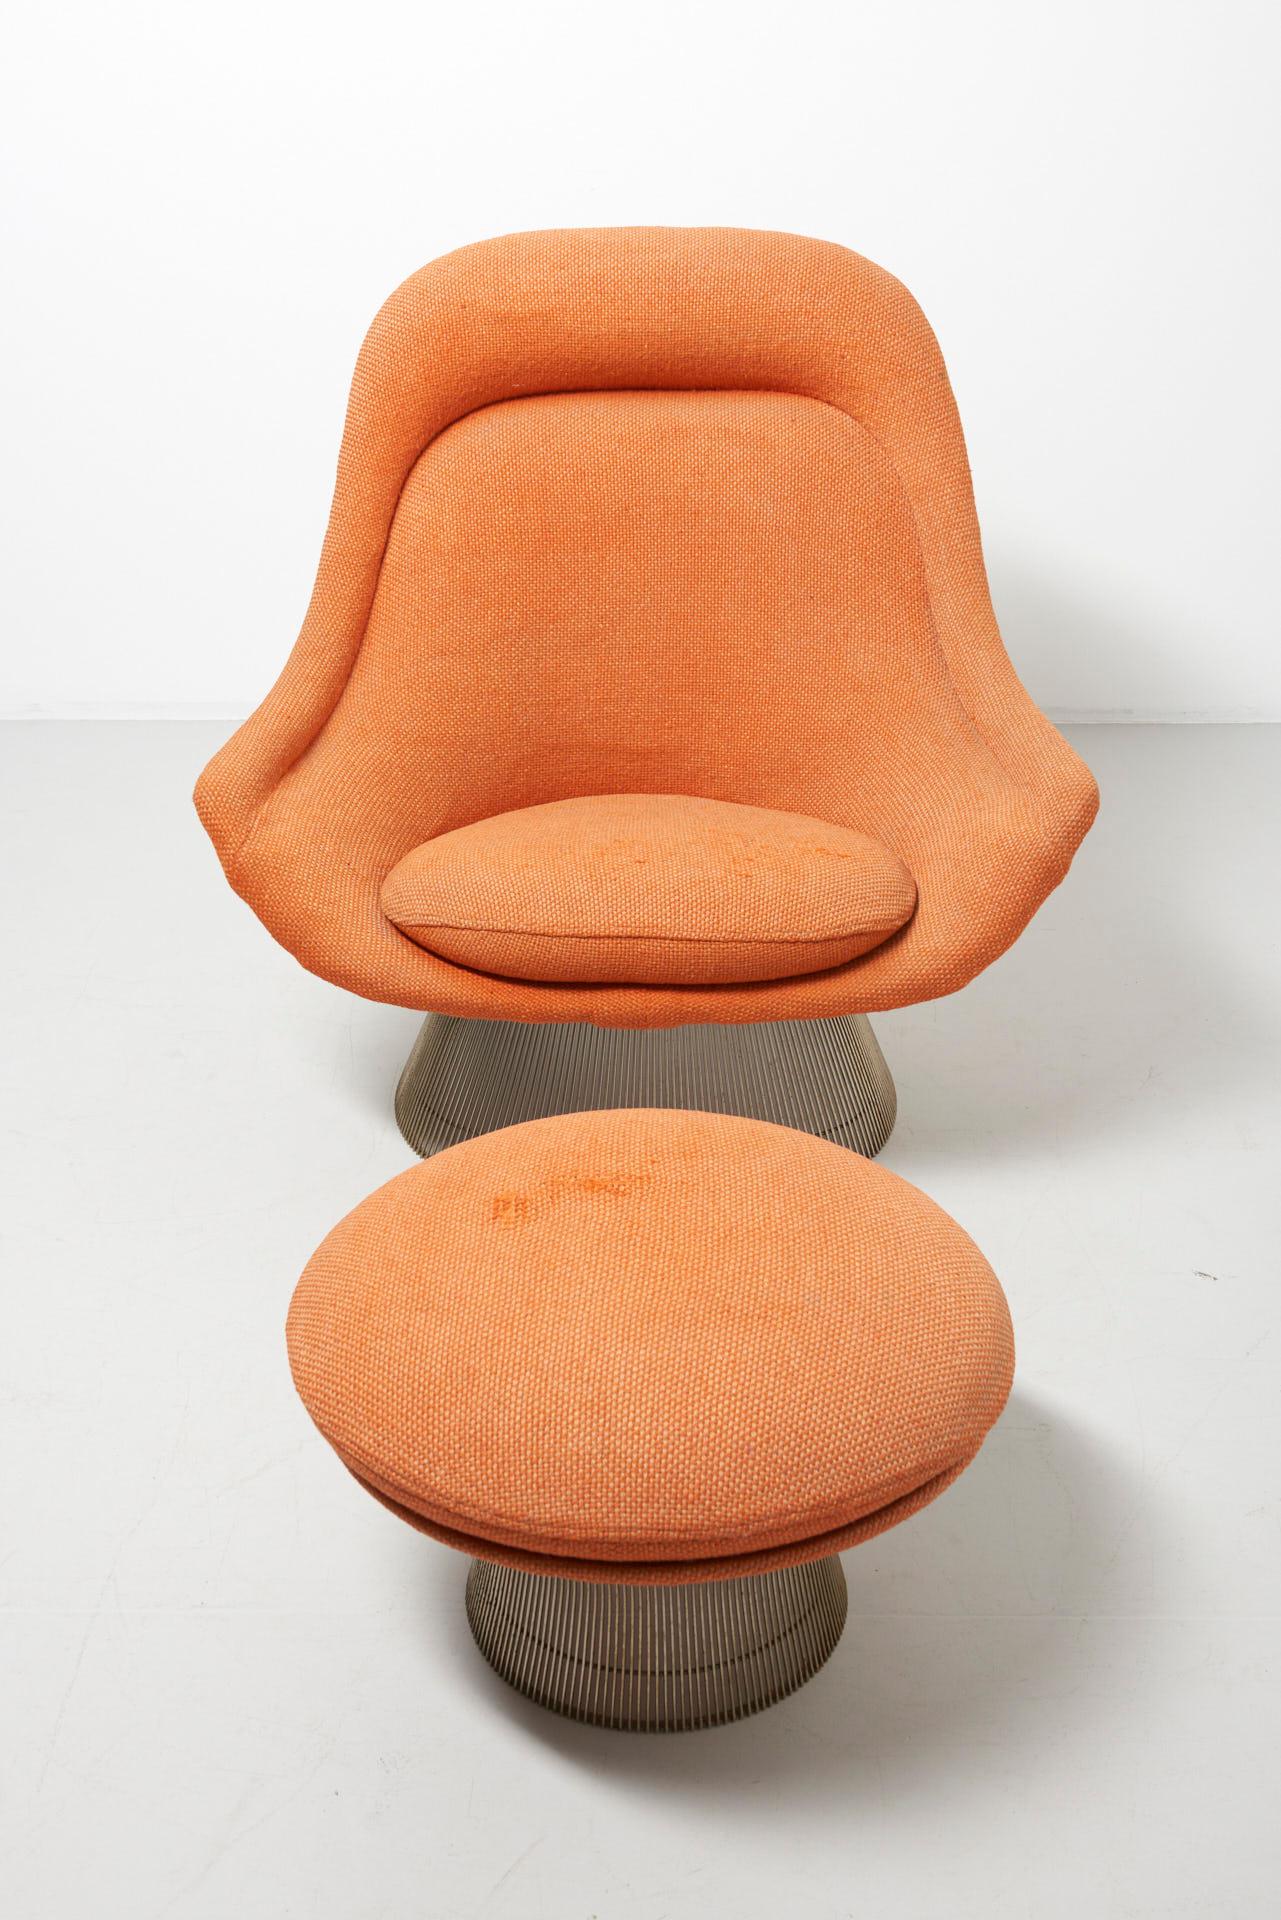 A 'model 1705' lounge chair with ottoman. Design by Warren Platner in 1966 for Knoll International. Made of nickelled steel and the original -faded- orange fabric. This iconic easy chair by Warren Platner is created by welding curved steel rods to